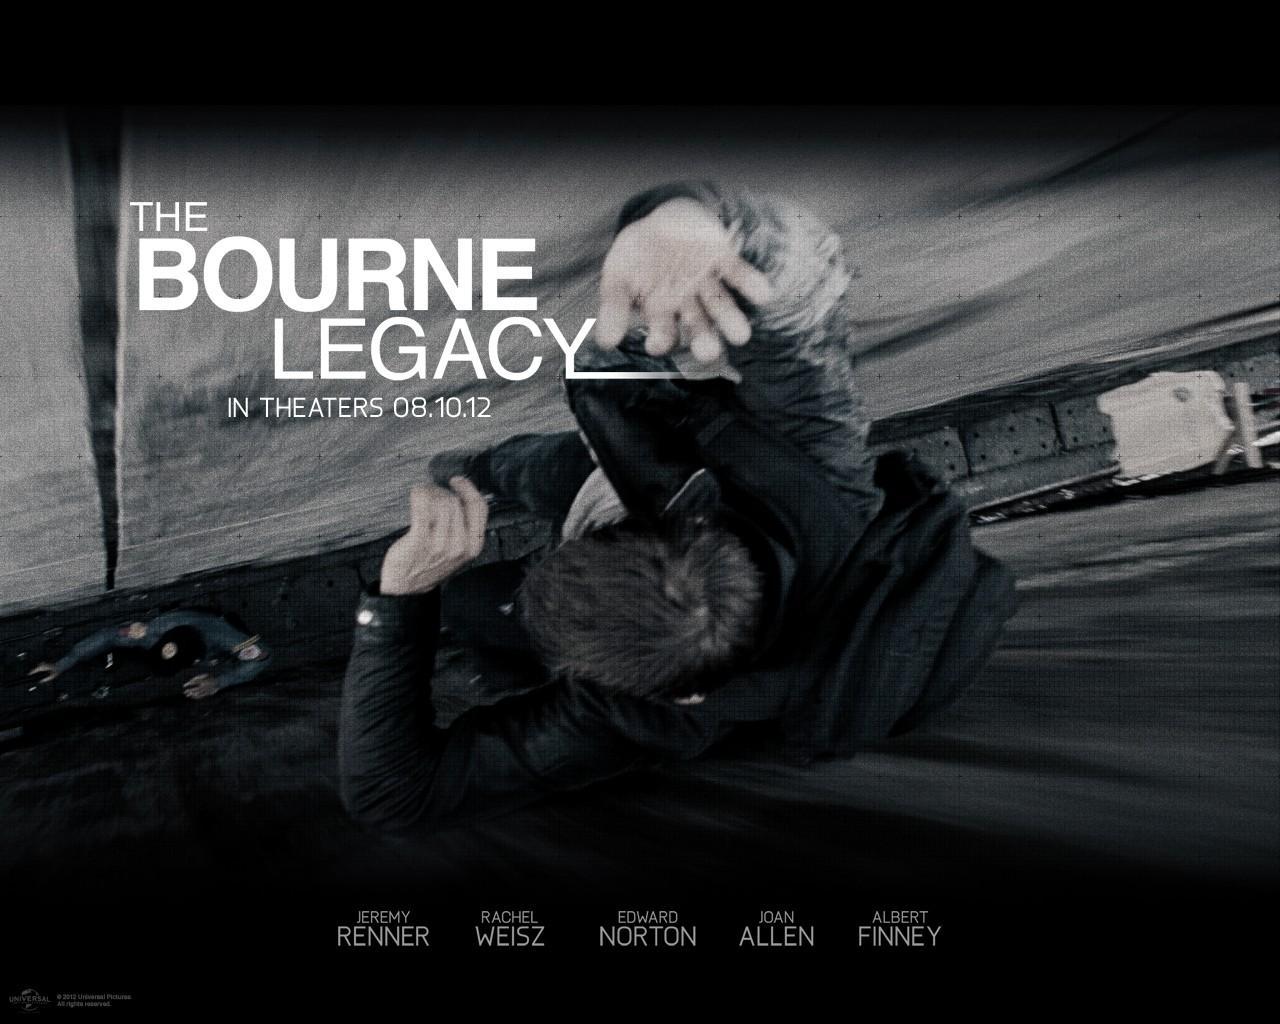 Image gallery for The Bourne Legacy